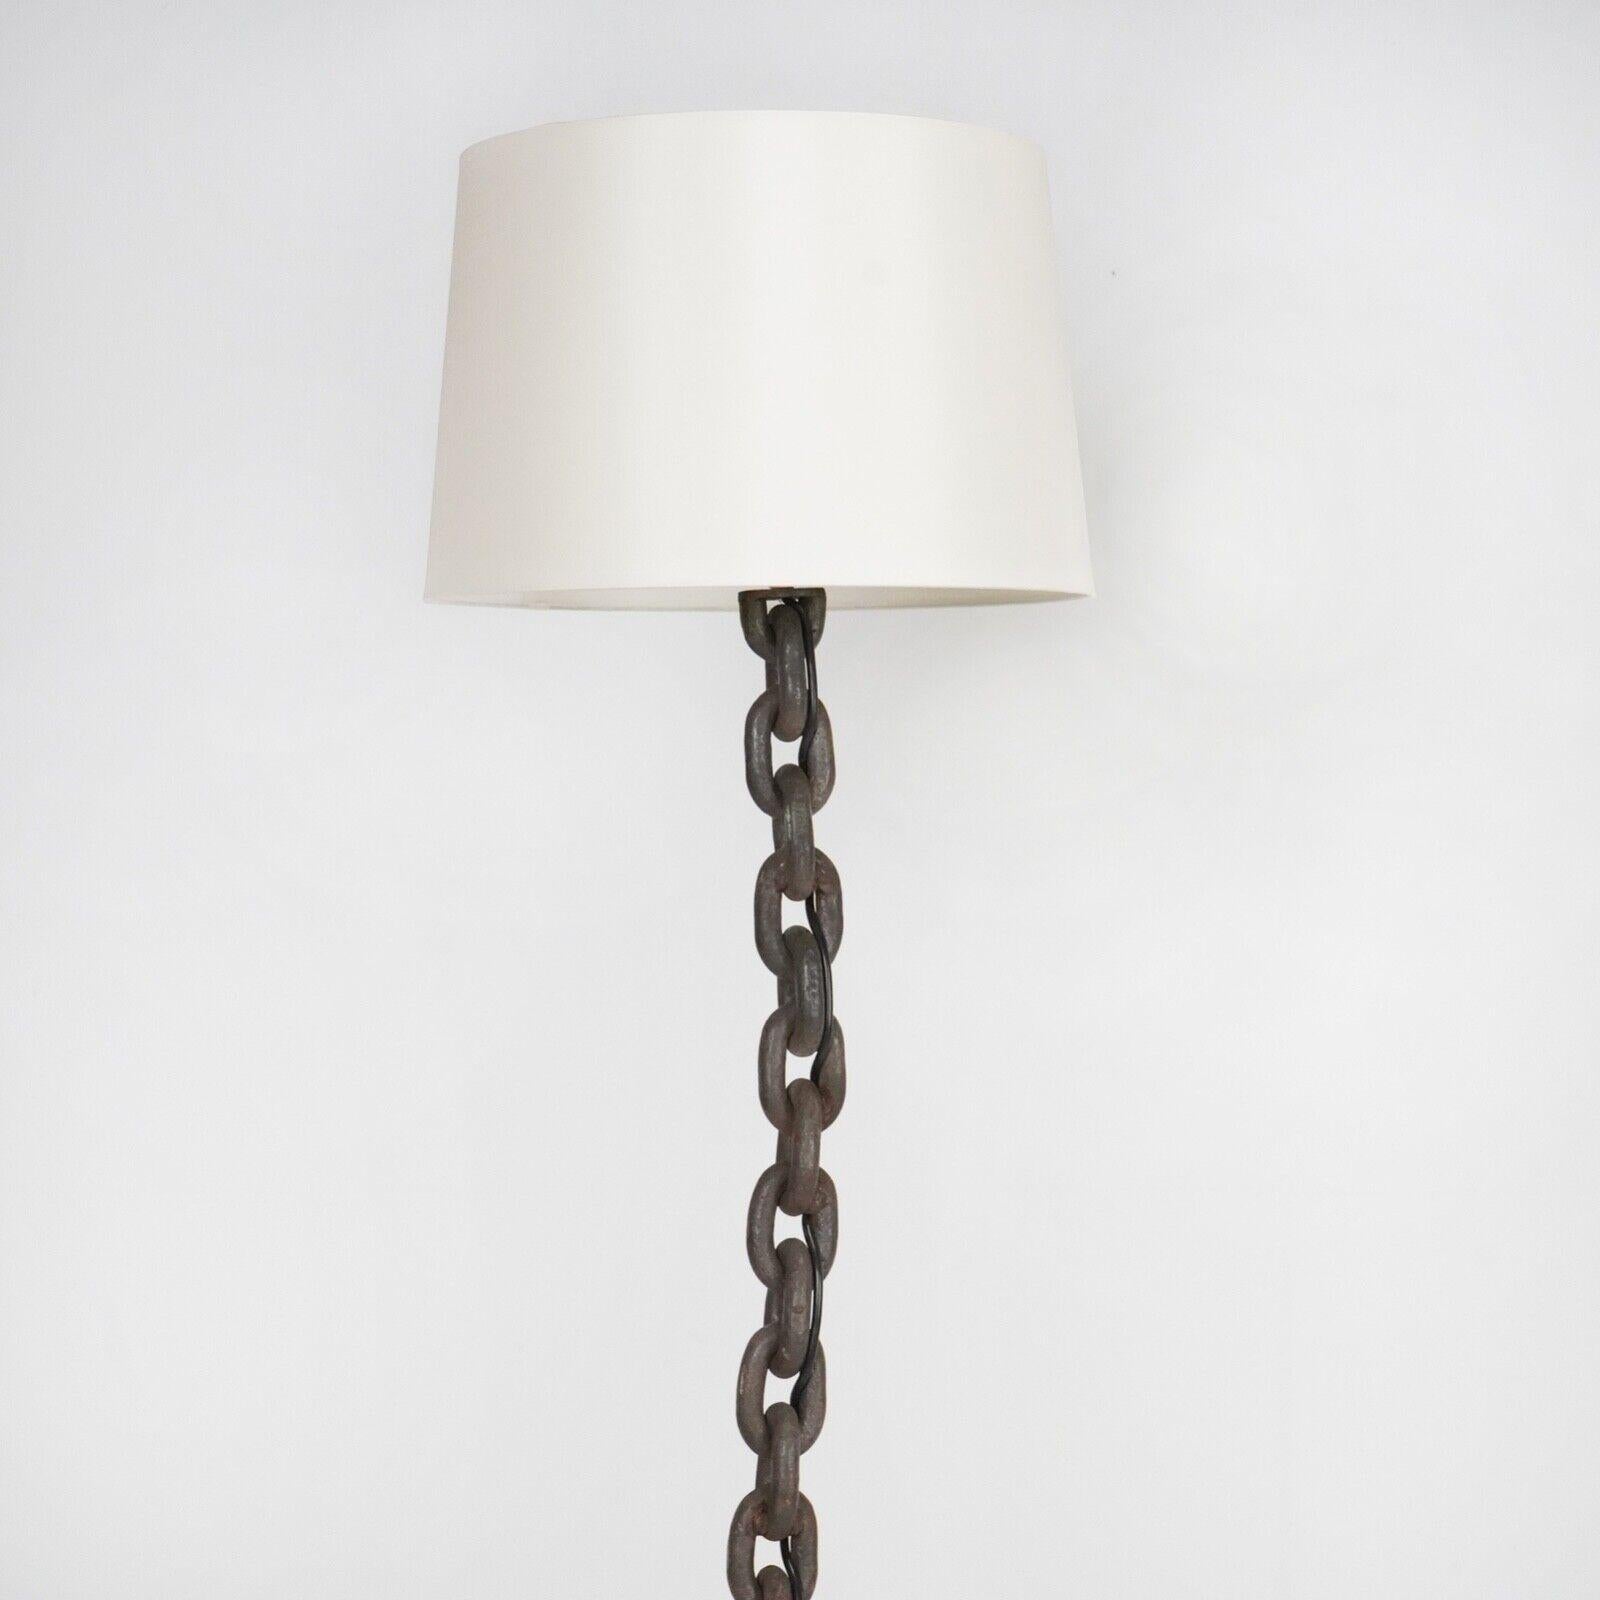 A brutalist floor lamp from the 1960s in chain links welded to a steel tripod base. 
Re-wired and PAT tested.

Dimensions

H 138cm (without shade)
32cm at base 

About Us  
We are Stowaway London a small online business which sells a selection of